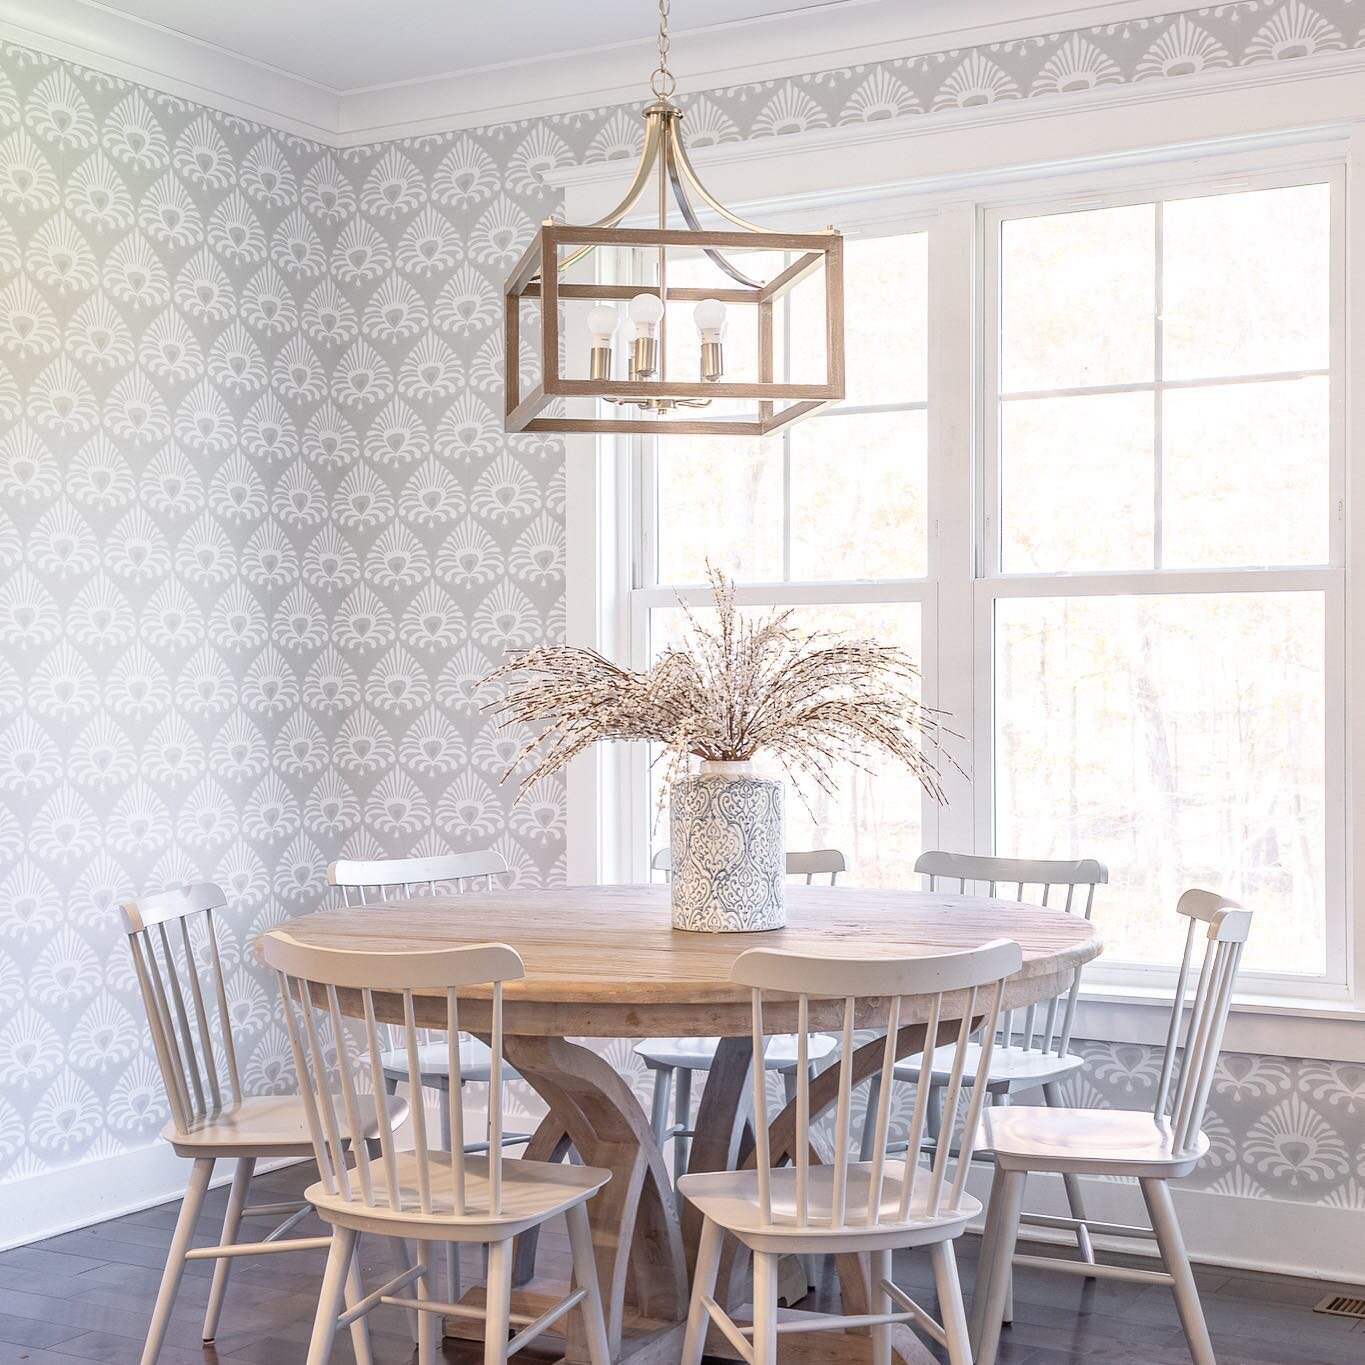 The sun is shining so bright today!  Soaking up this warm weather while it lasts . Happy Monday friends! 📷: @emily_bauslaugh_photography 
#myslphoto #serenaandlily #breakfastnook #wallpaper #serenaandlilywallpaper # #kitchen #wallpaper